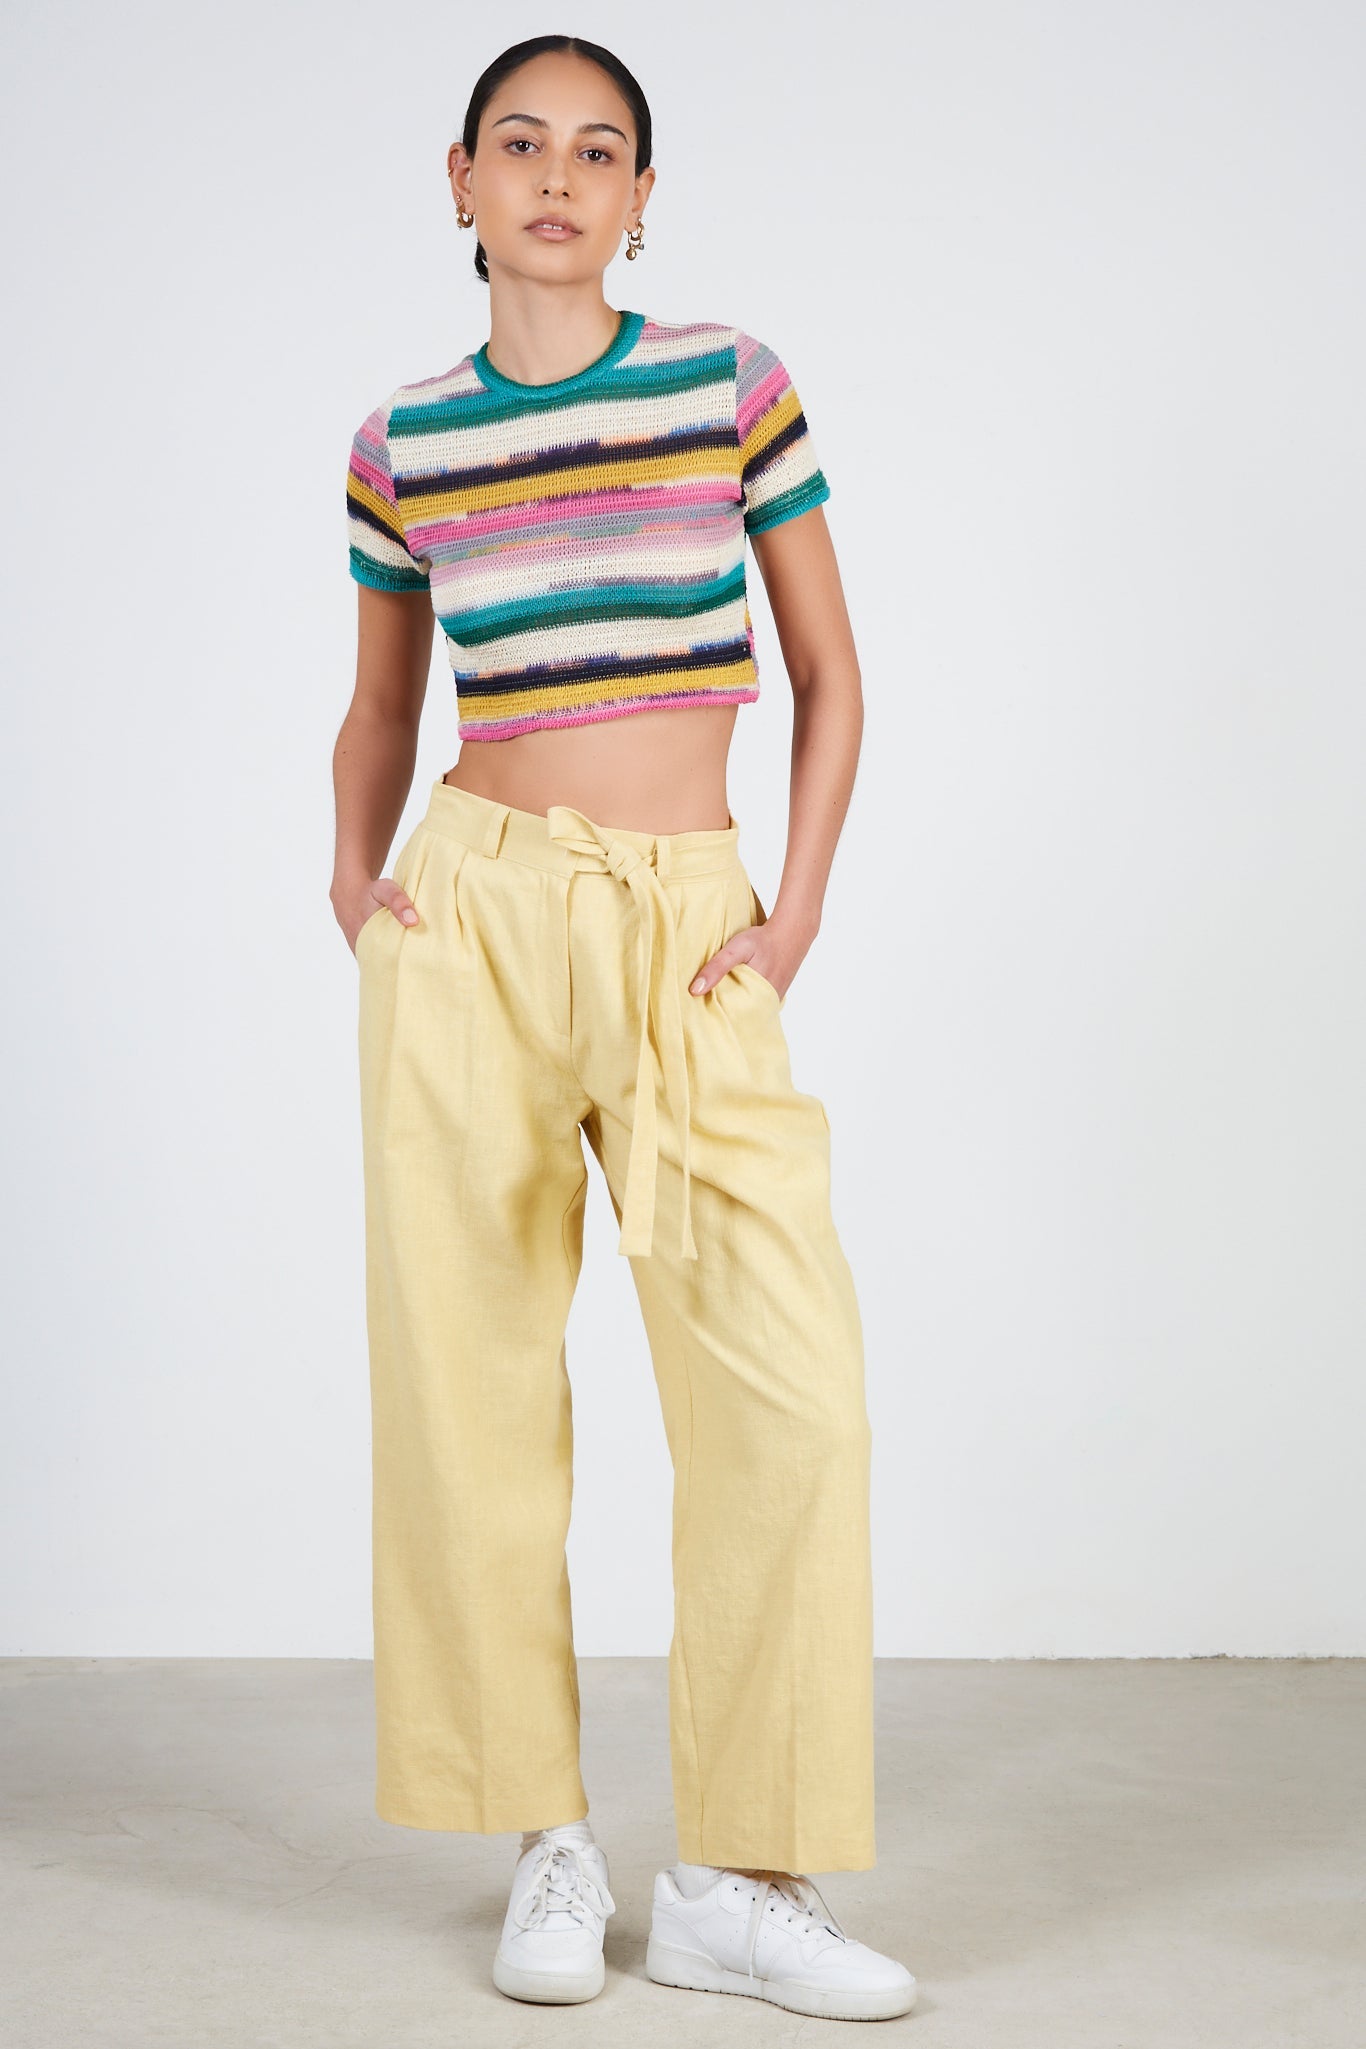 Green rainbow striped cropped tee